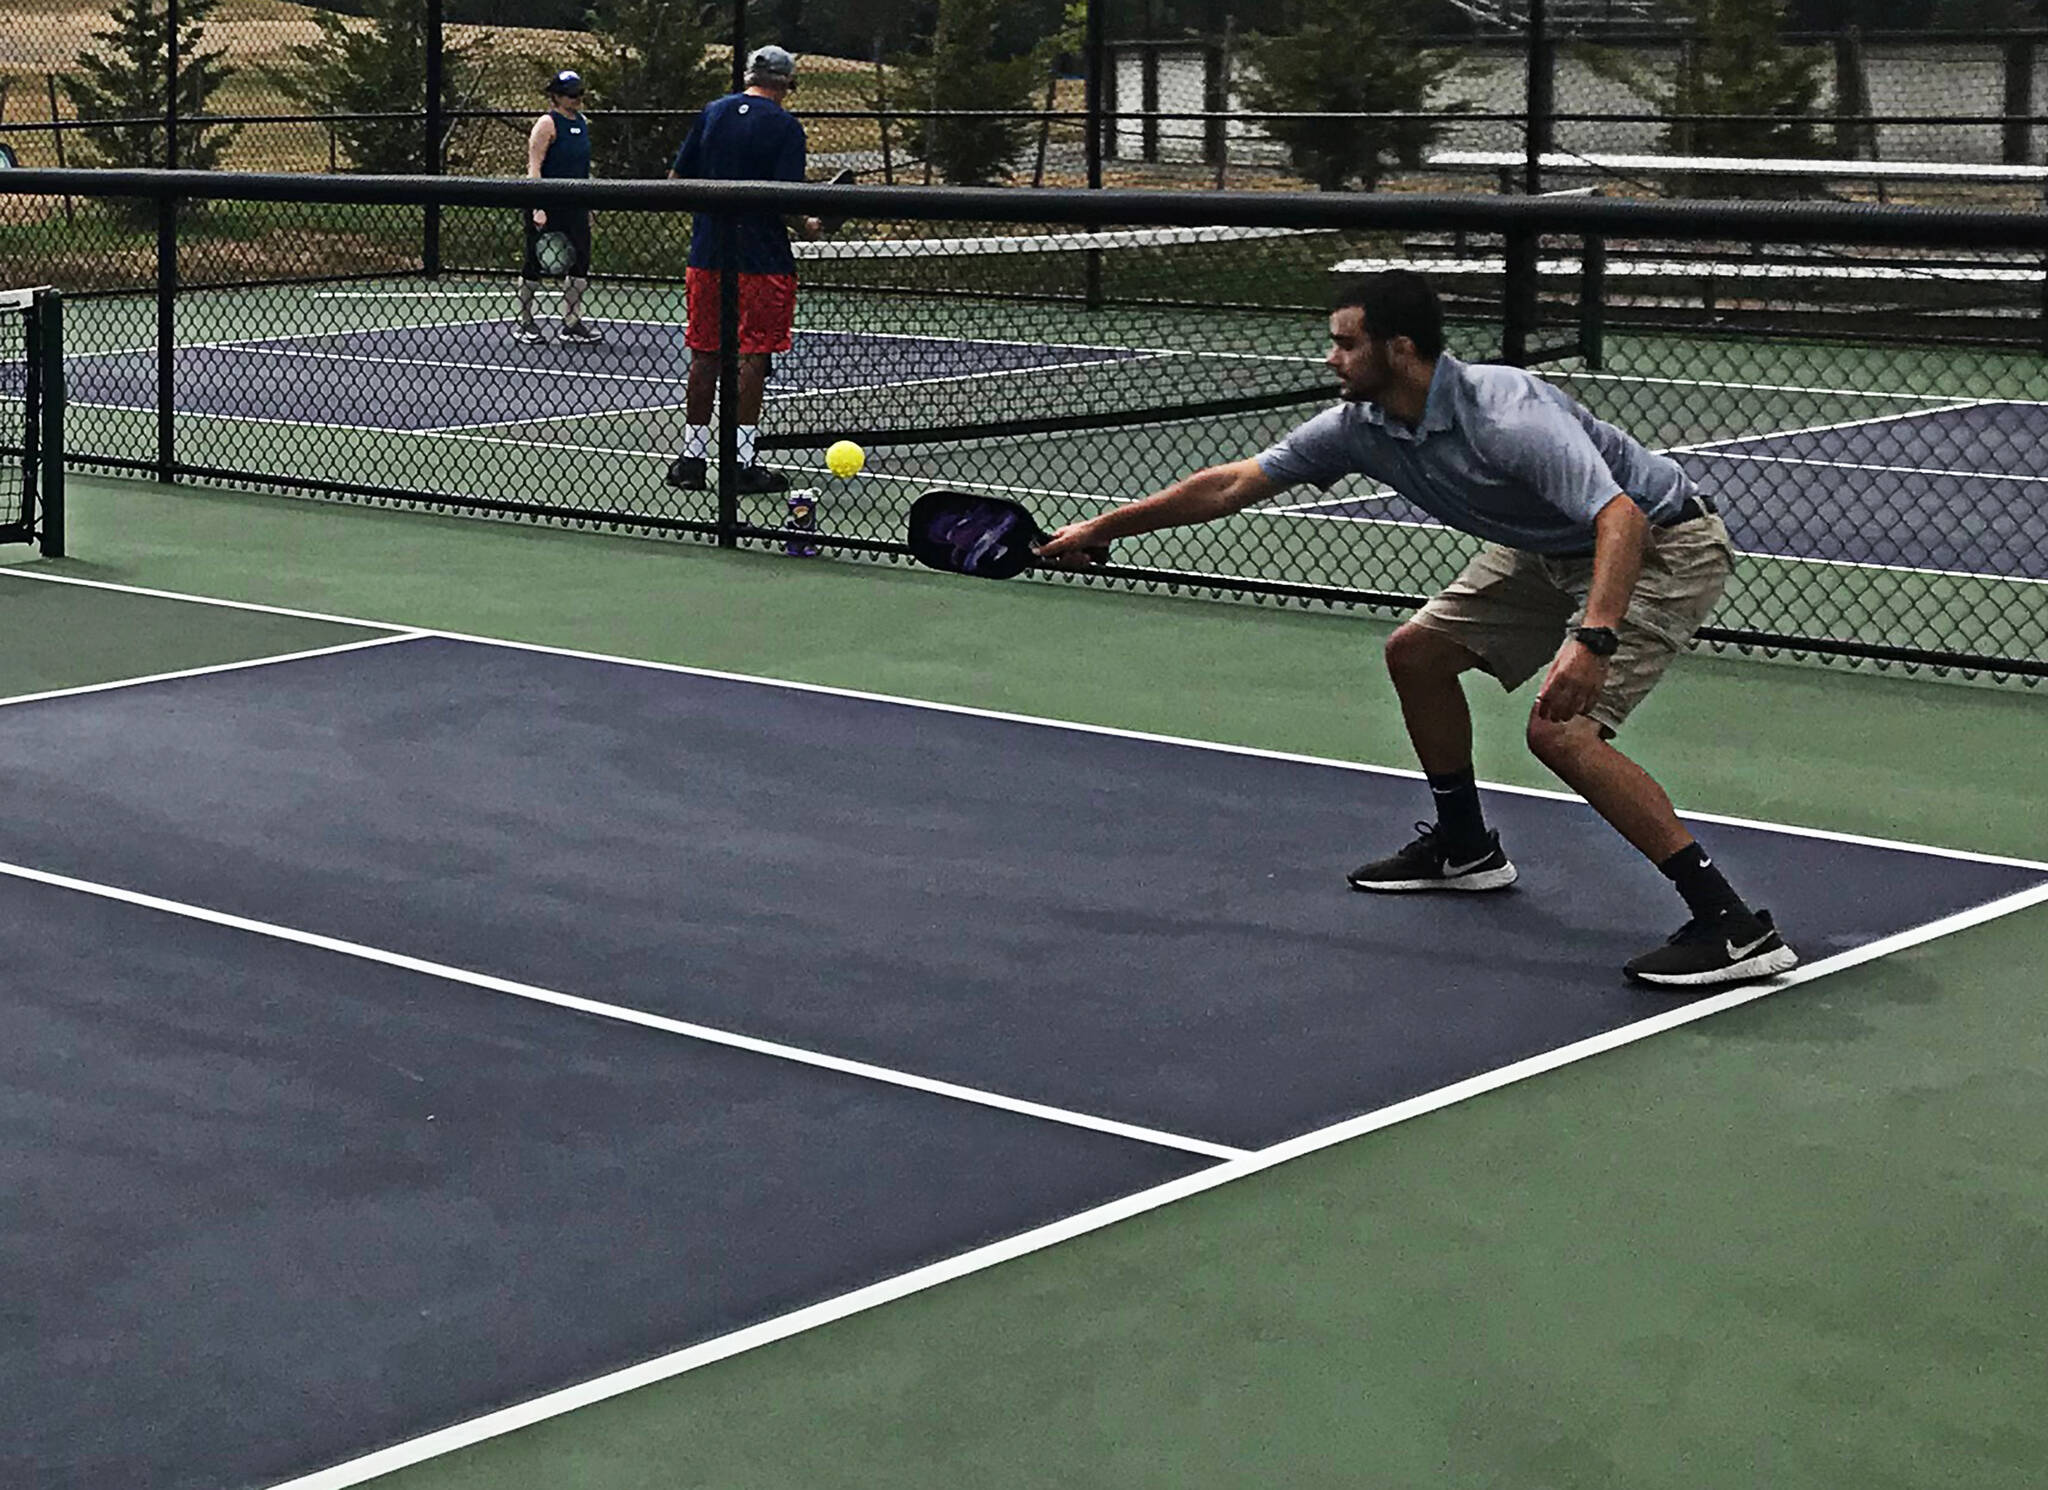 On the court, I had the opportunity to learn different strategies like working on a backhand. Bill Covert Courtesy Photo